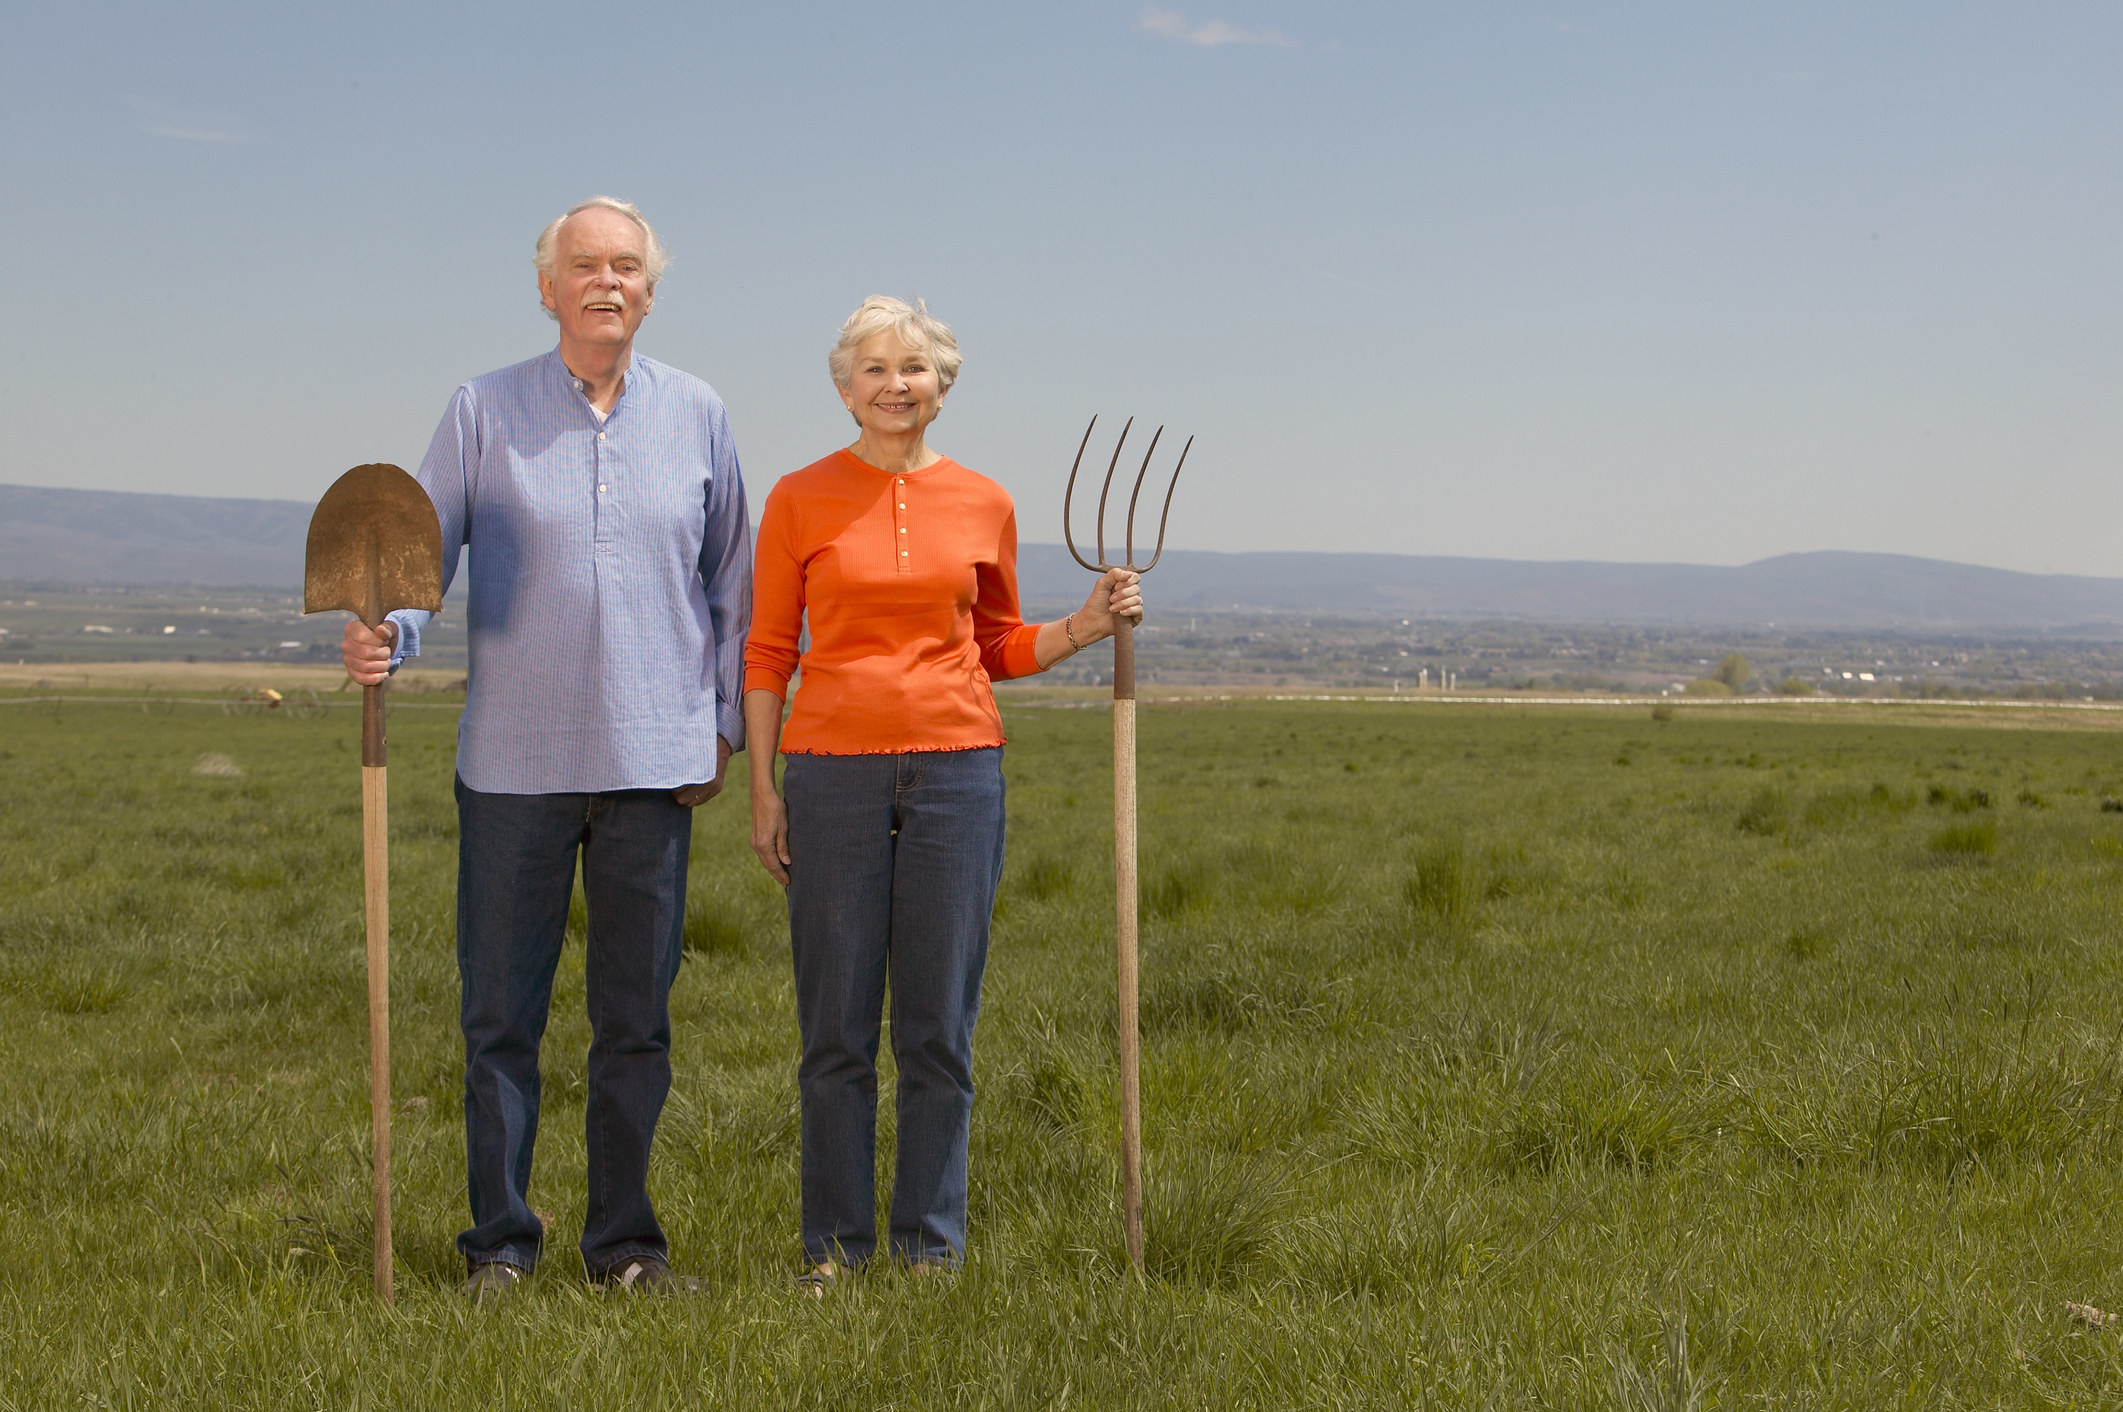 Two people standing in a field holding a shovel and a rake